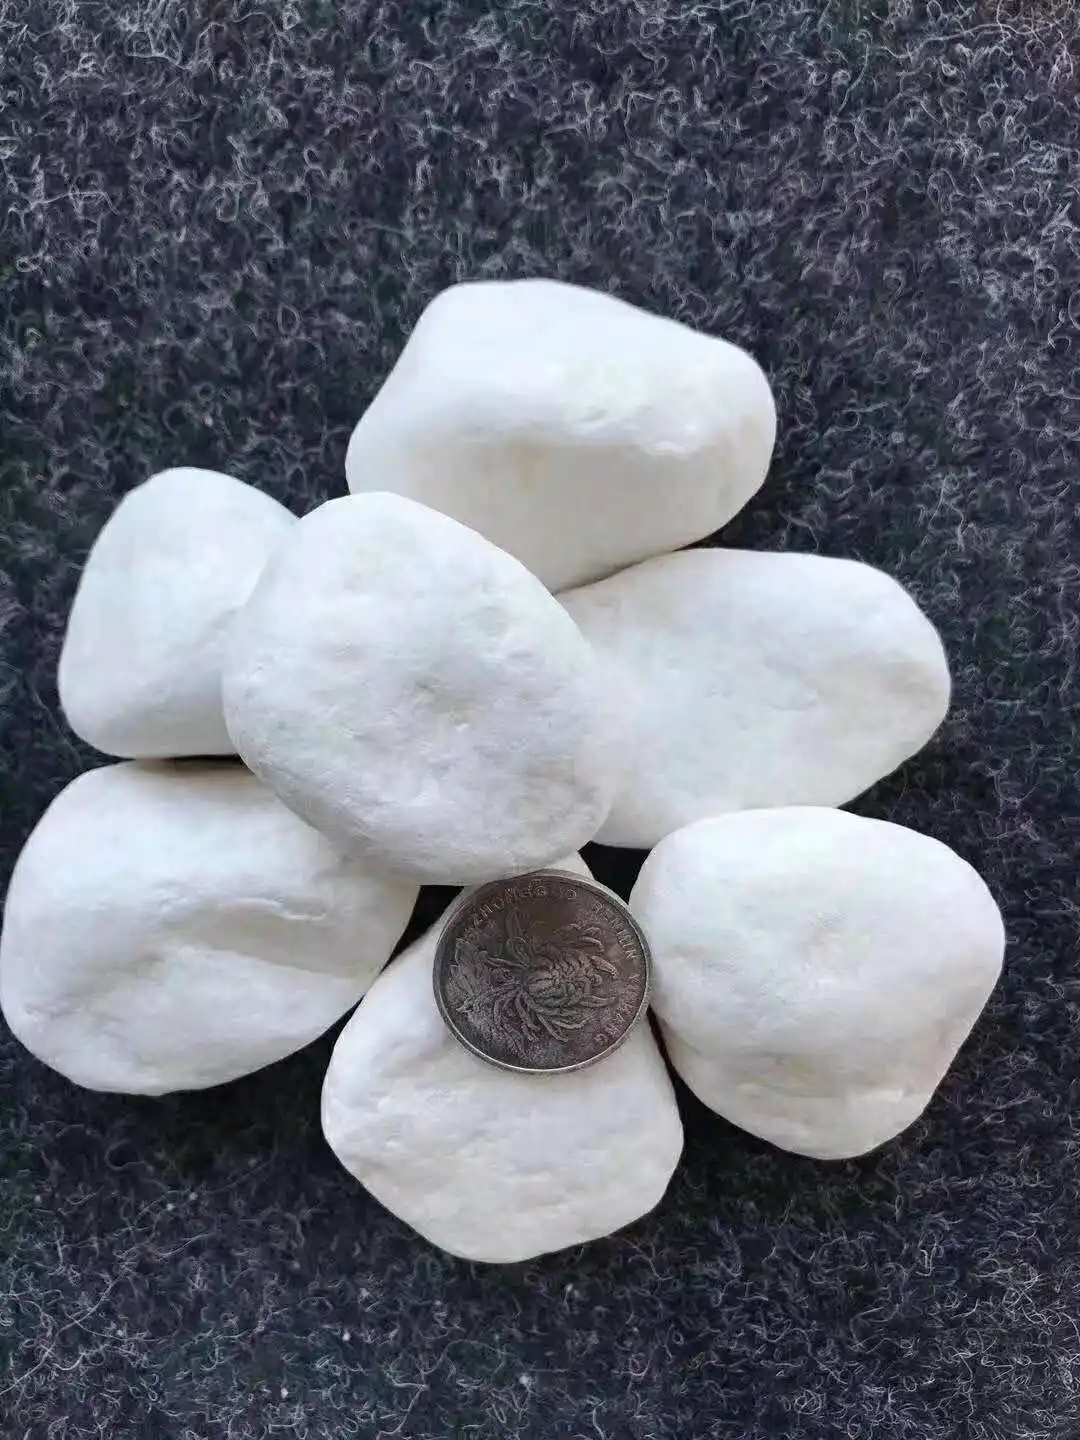 Decorative Snow White Pebble Stone For Garden Landscaping Road Paving